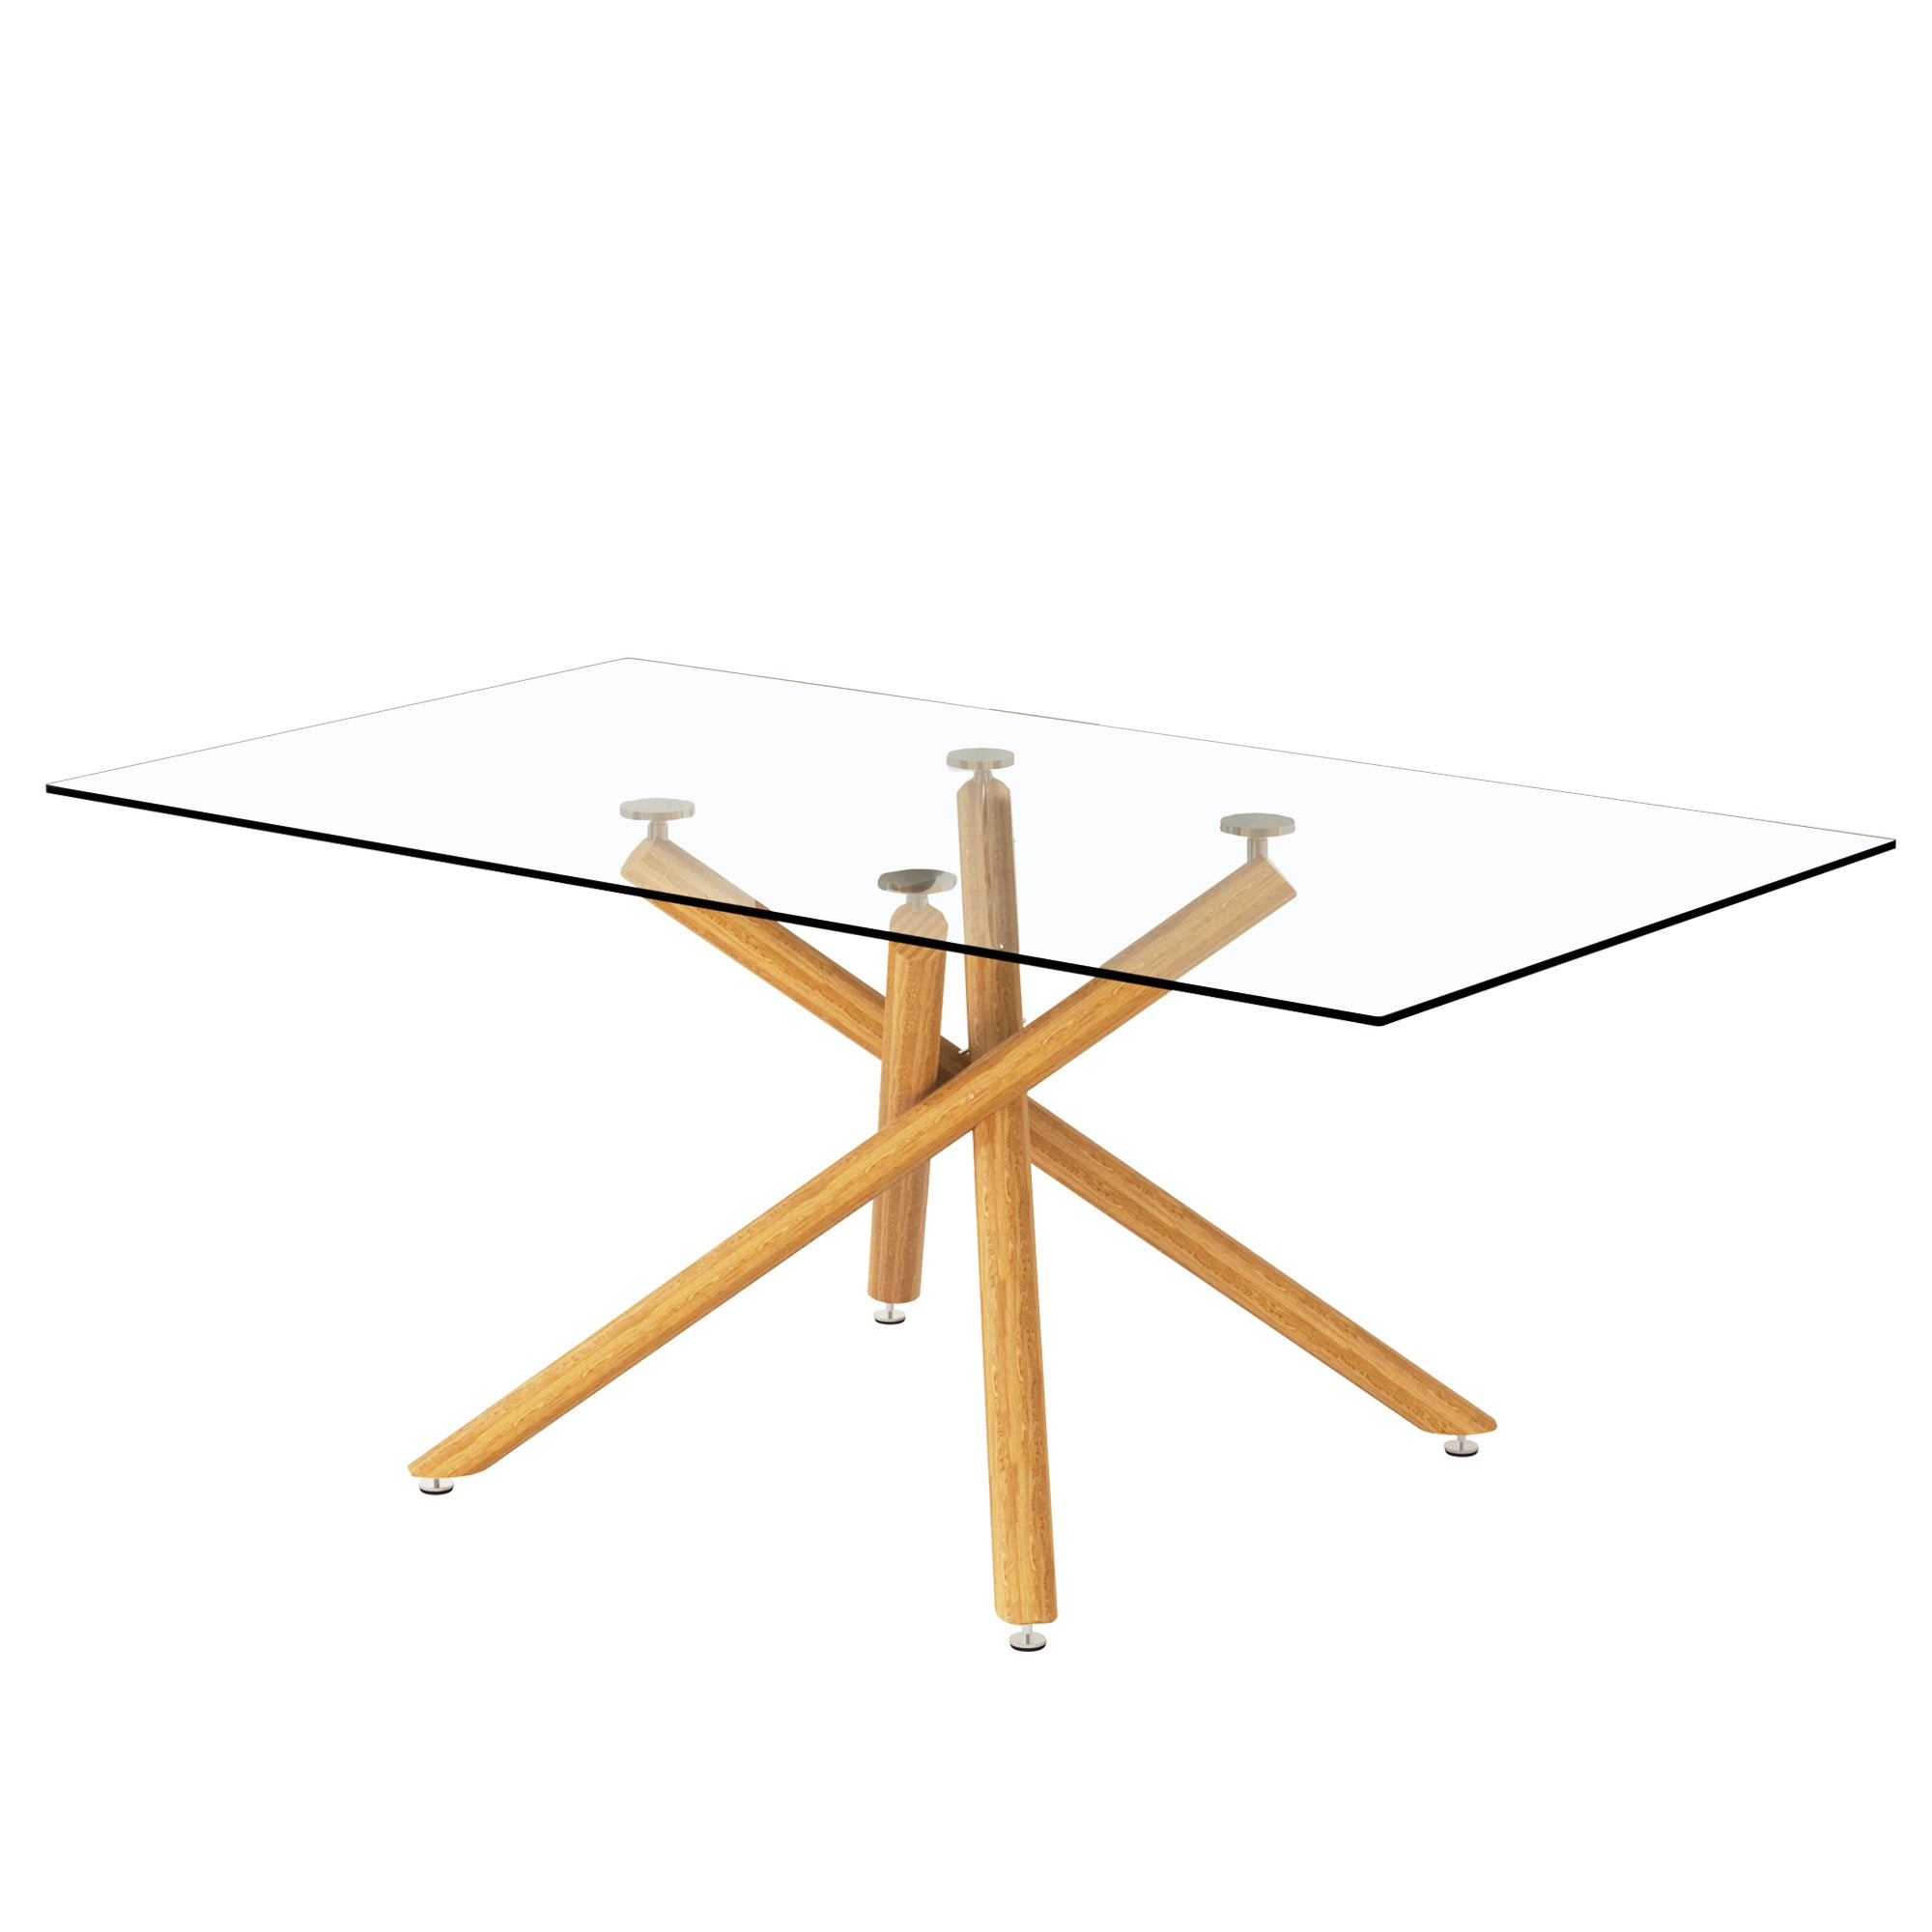 Modern Minimalist Rectangular Glass Dining Table for 6-8 with 0.39" Tempered Glass Tabletop and Wood color Metal Legs